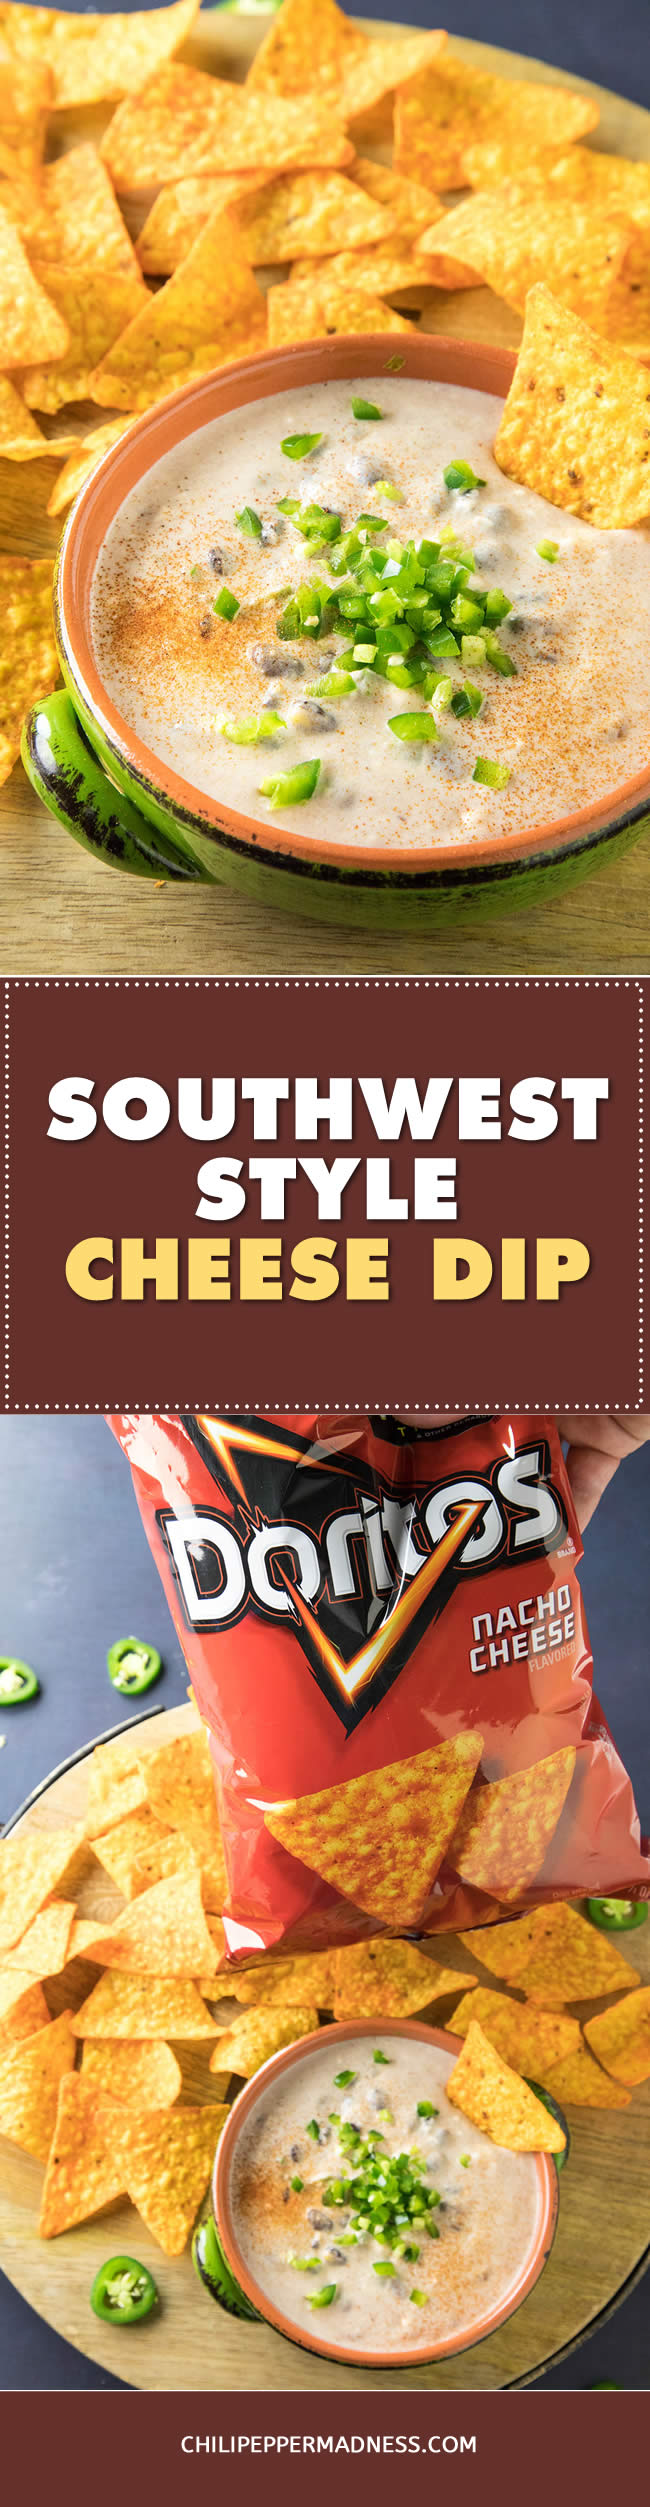 Southwest-Style Cheese Dip - Recipe